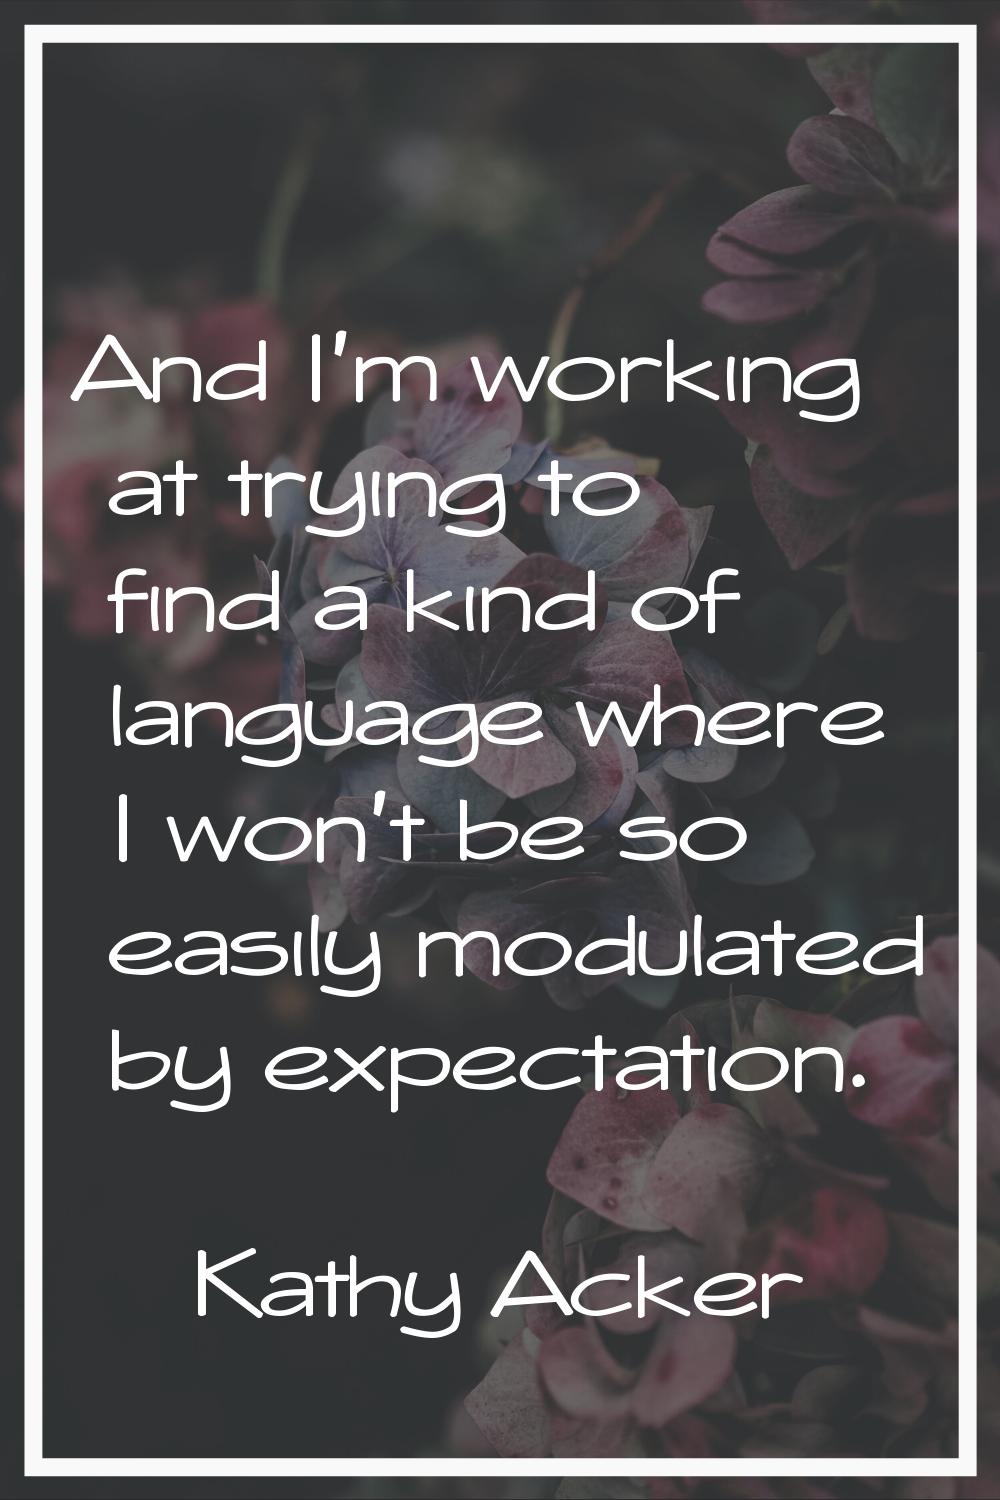 And I'm working at trying to find a kind of language where I won't be so easily modulated by expect